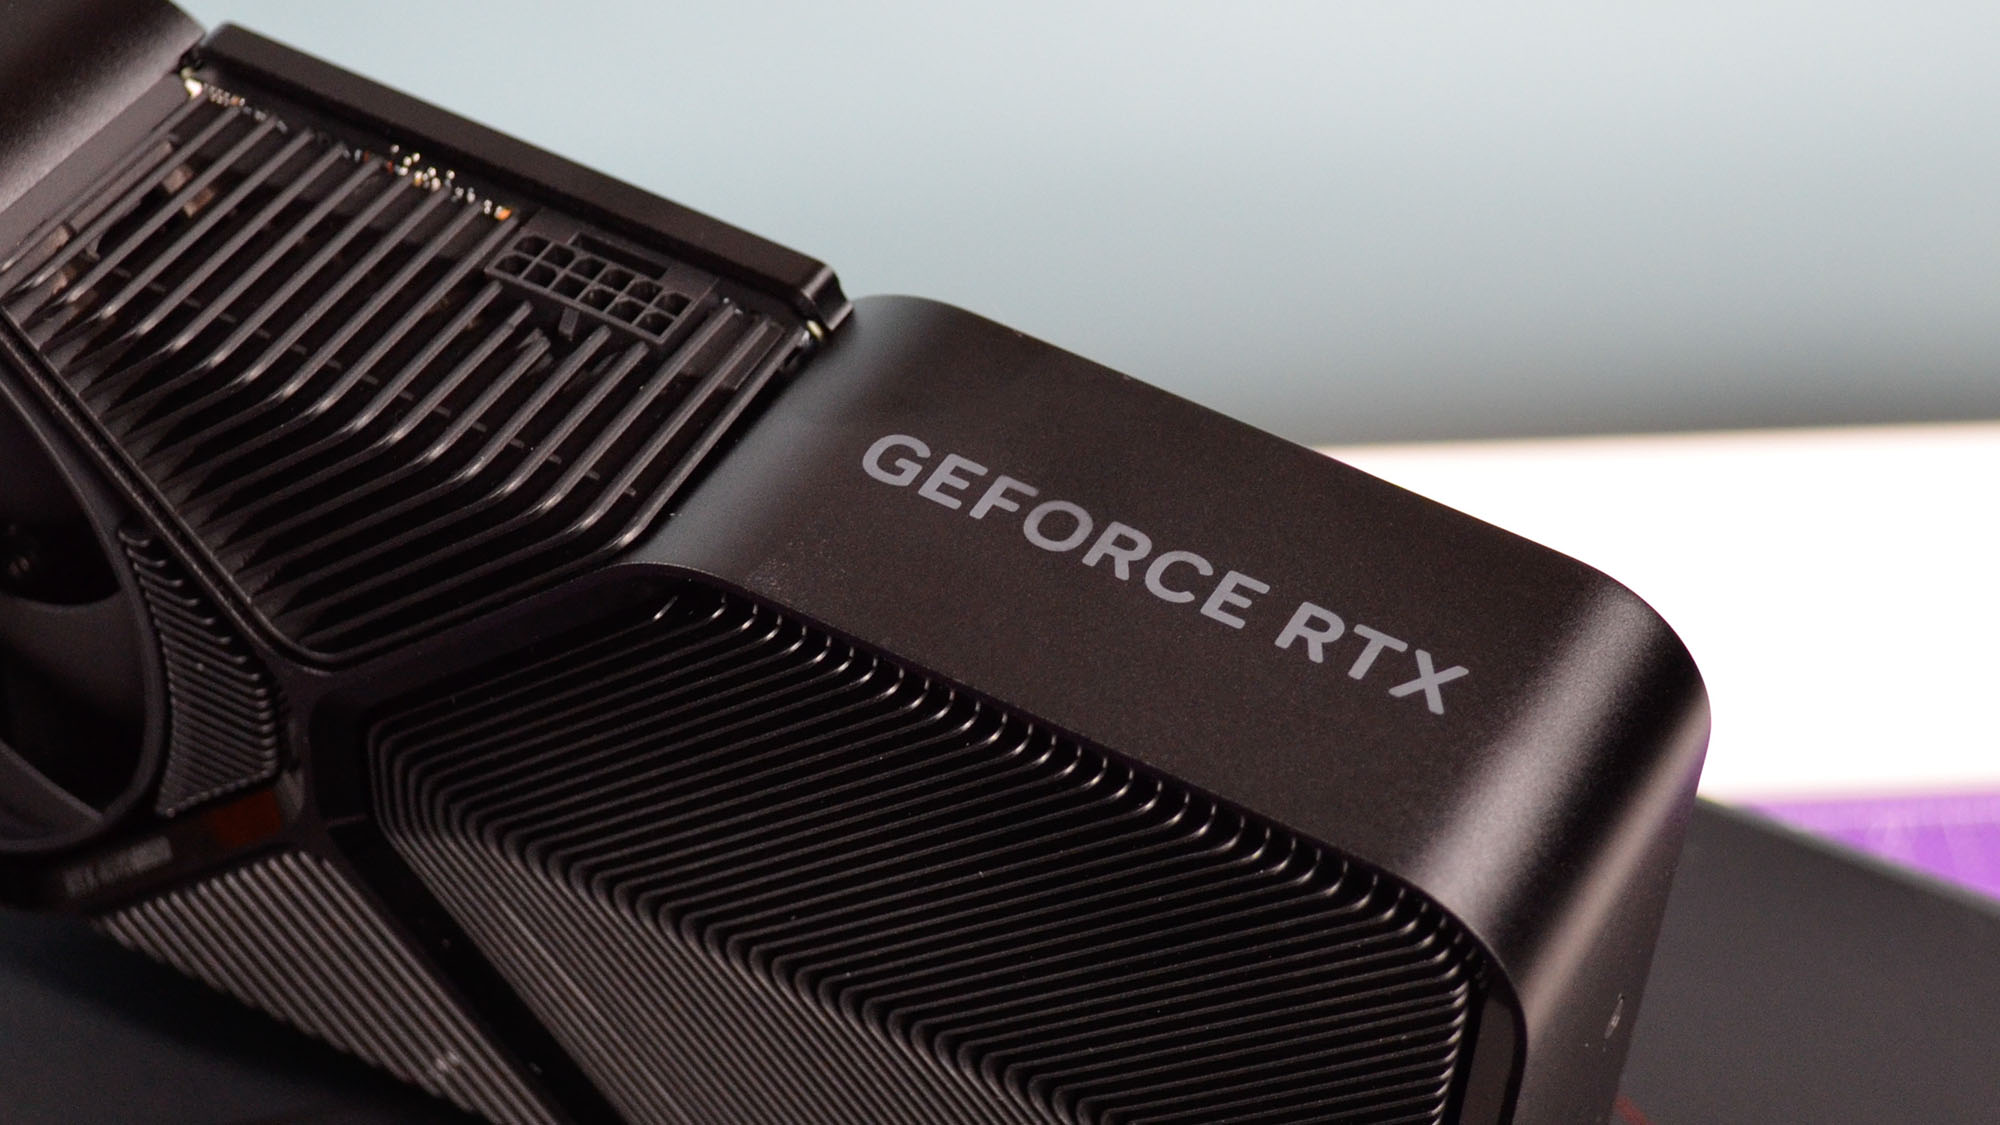 nvidia-rtx-gpus-get-one-of-the-coolest-features-ever:-automatic-overclocking-that-won’t-affect-your-warranty